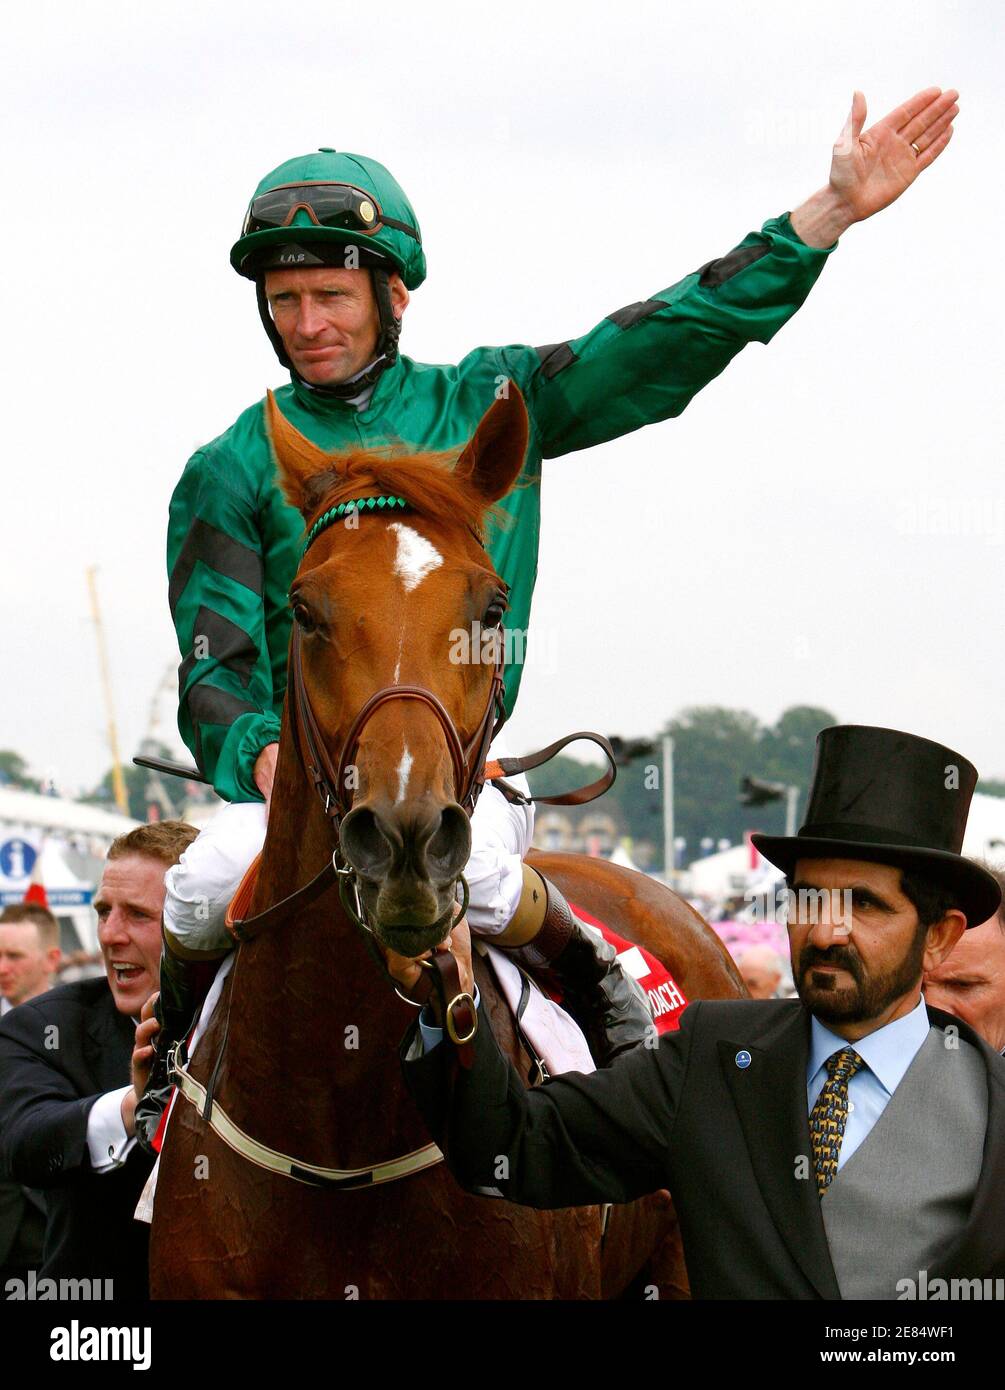 Kevin Manning riding New Approach celebrates after winning the Derby during the Epsom Derby Festival at Epsom Downs in Surrey, southern England, June 7, 2008.  REUTERS/Alessia Pierdomenico (BRITAIN) Stock Photo